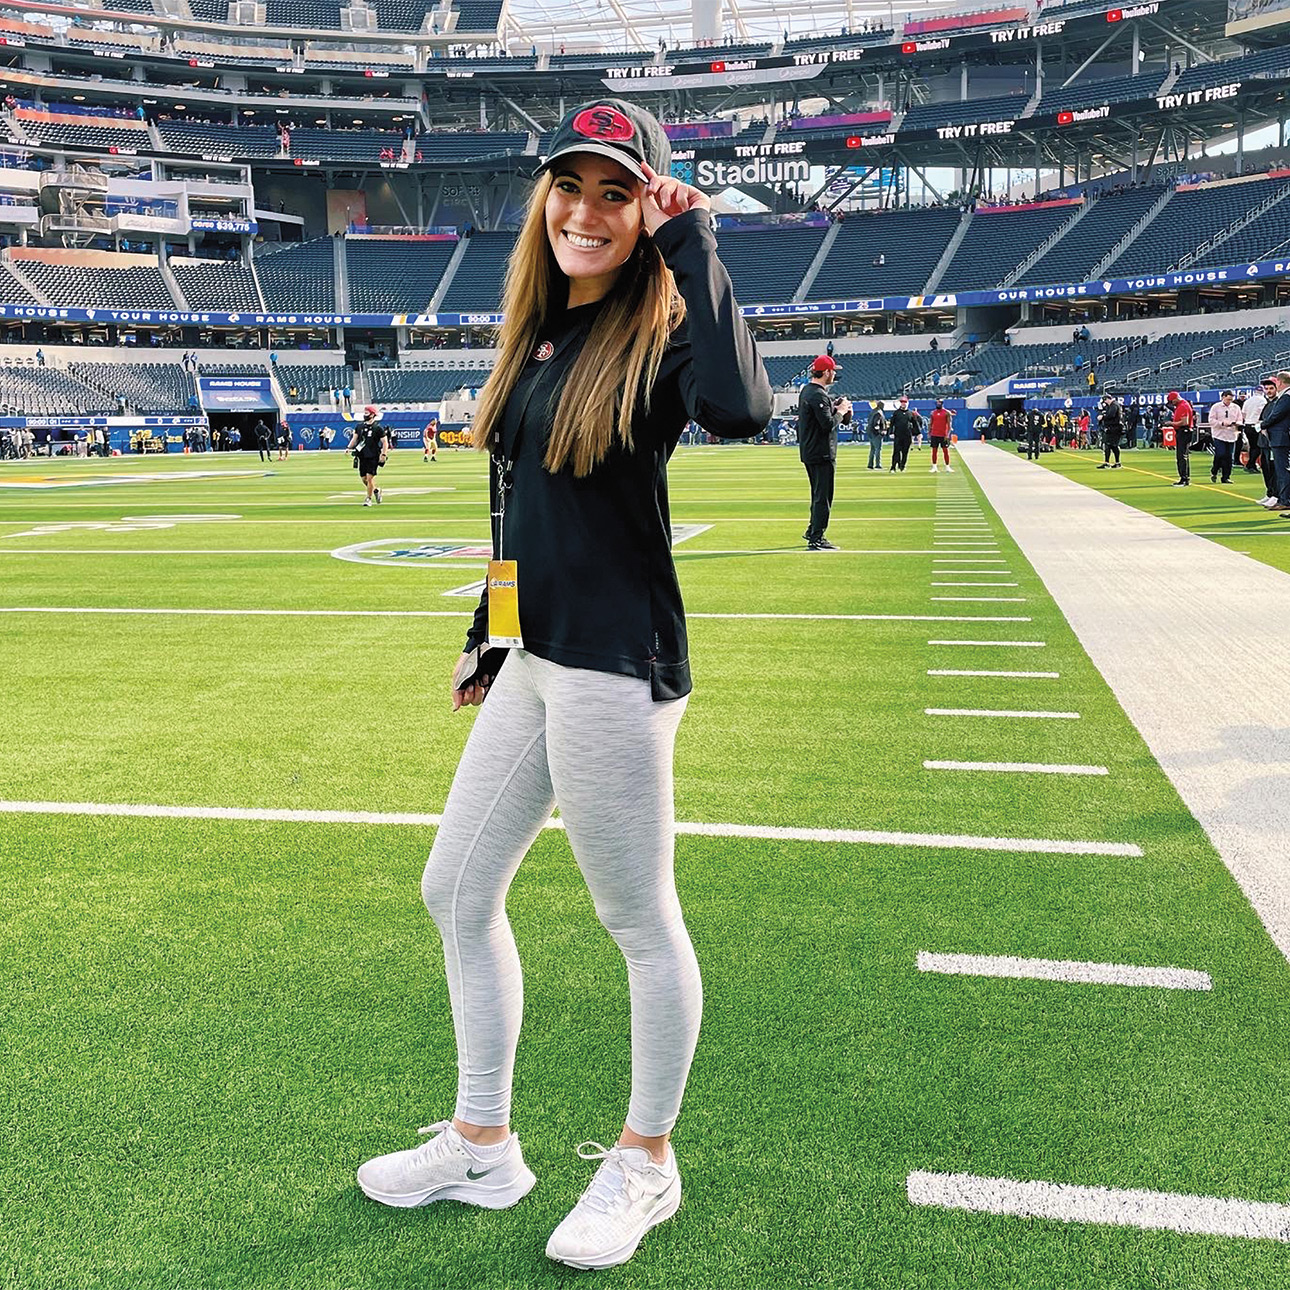 Emma Steinberg poses with her hat on a football field.